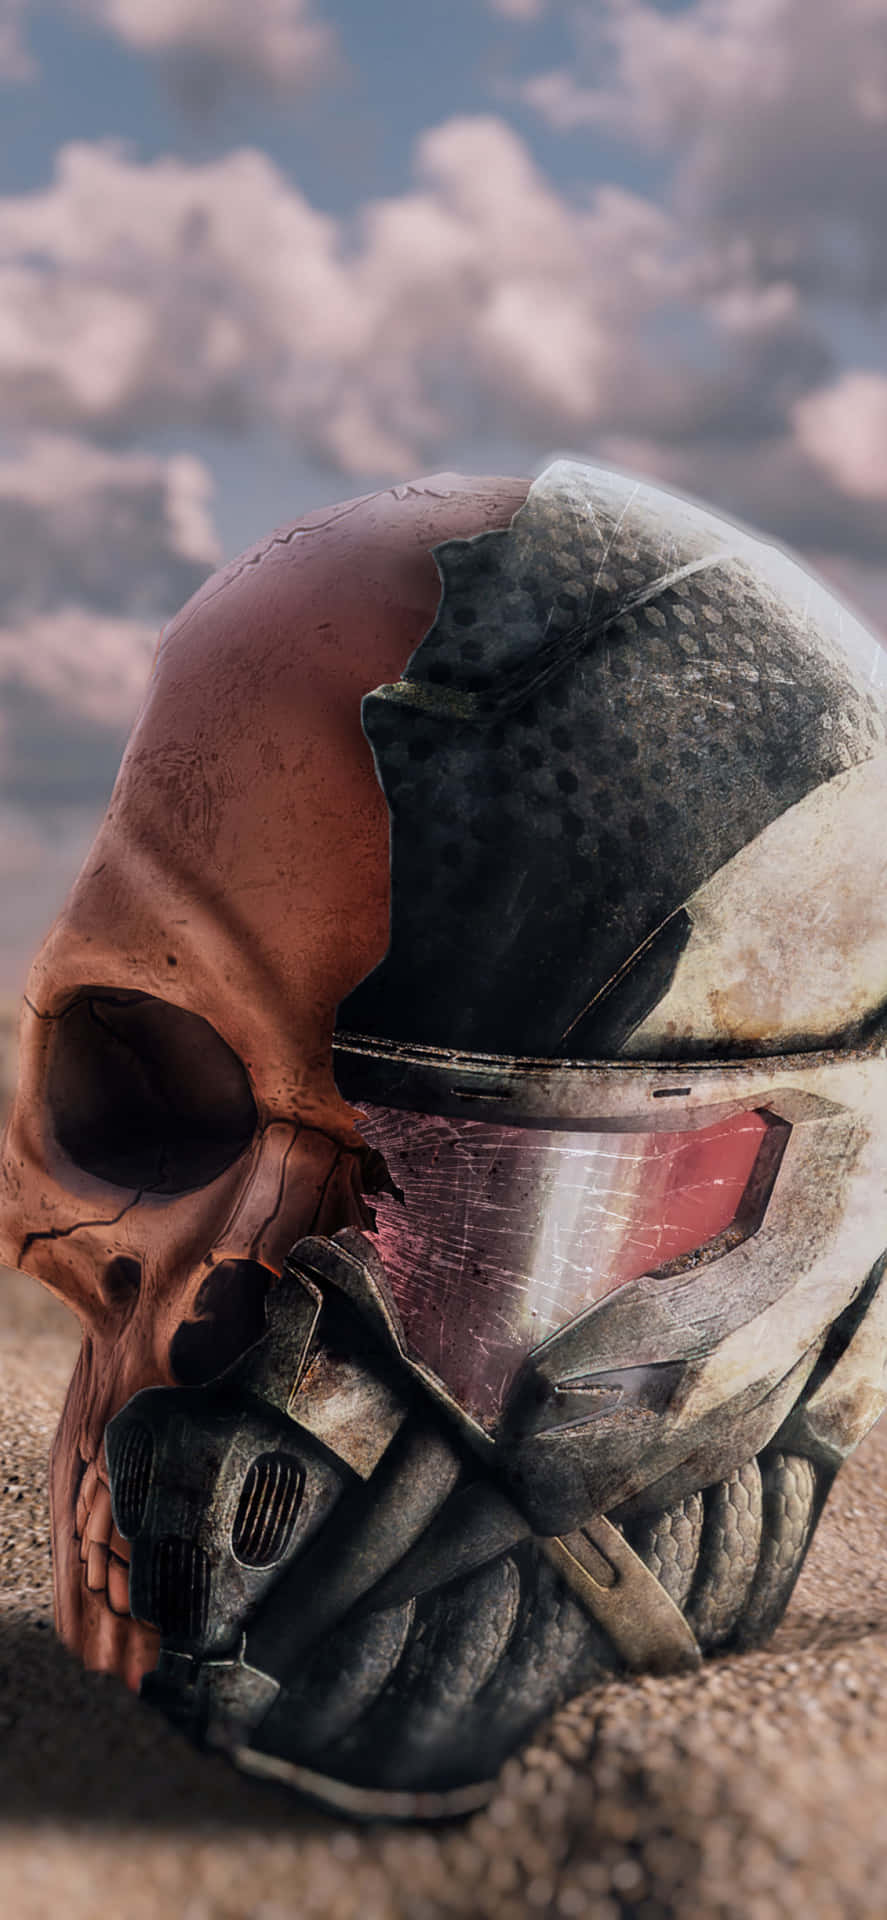 A Skull With A Helmet On It In The Desert